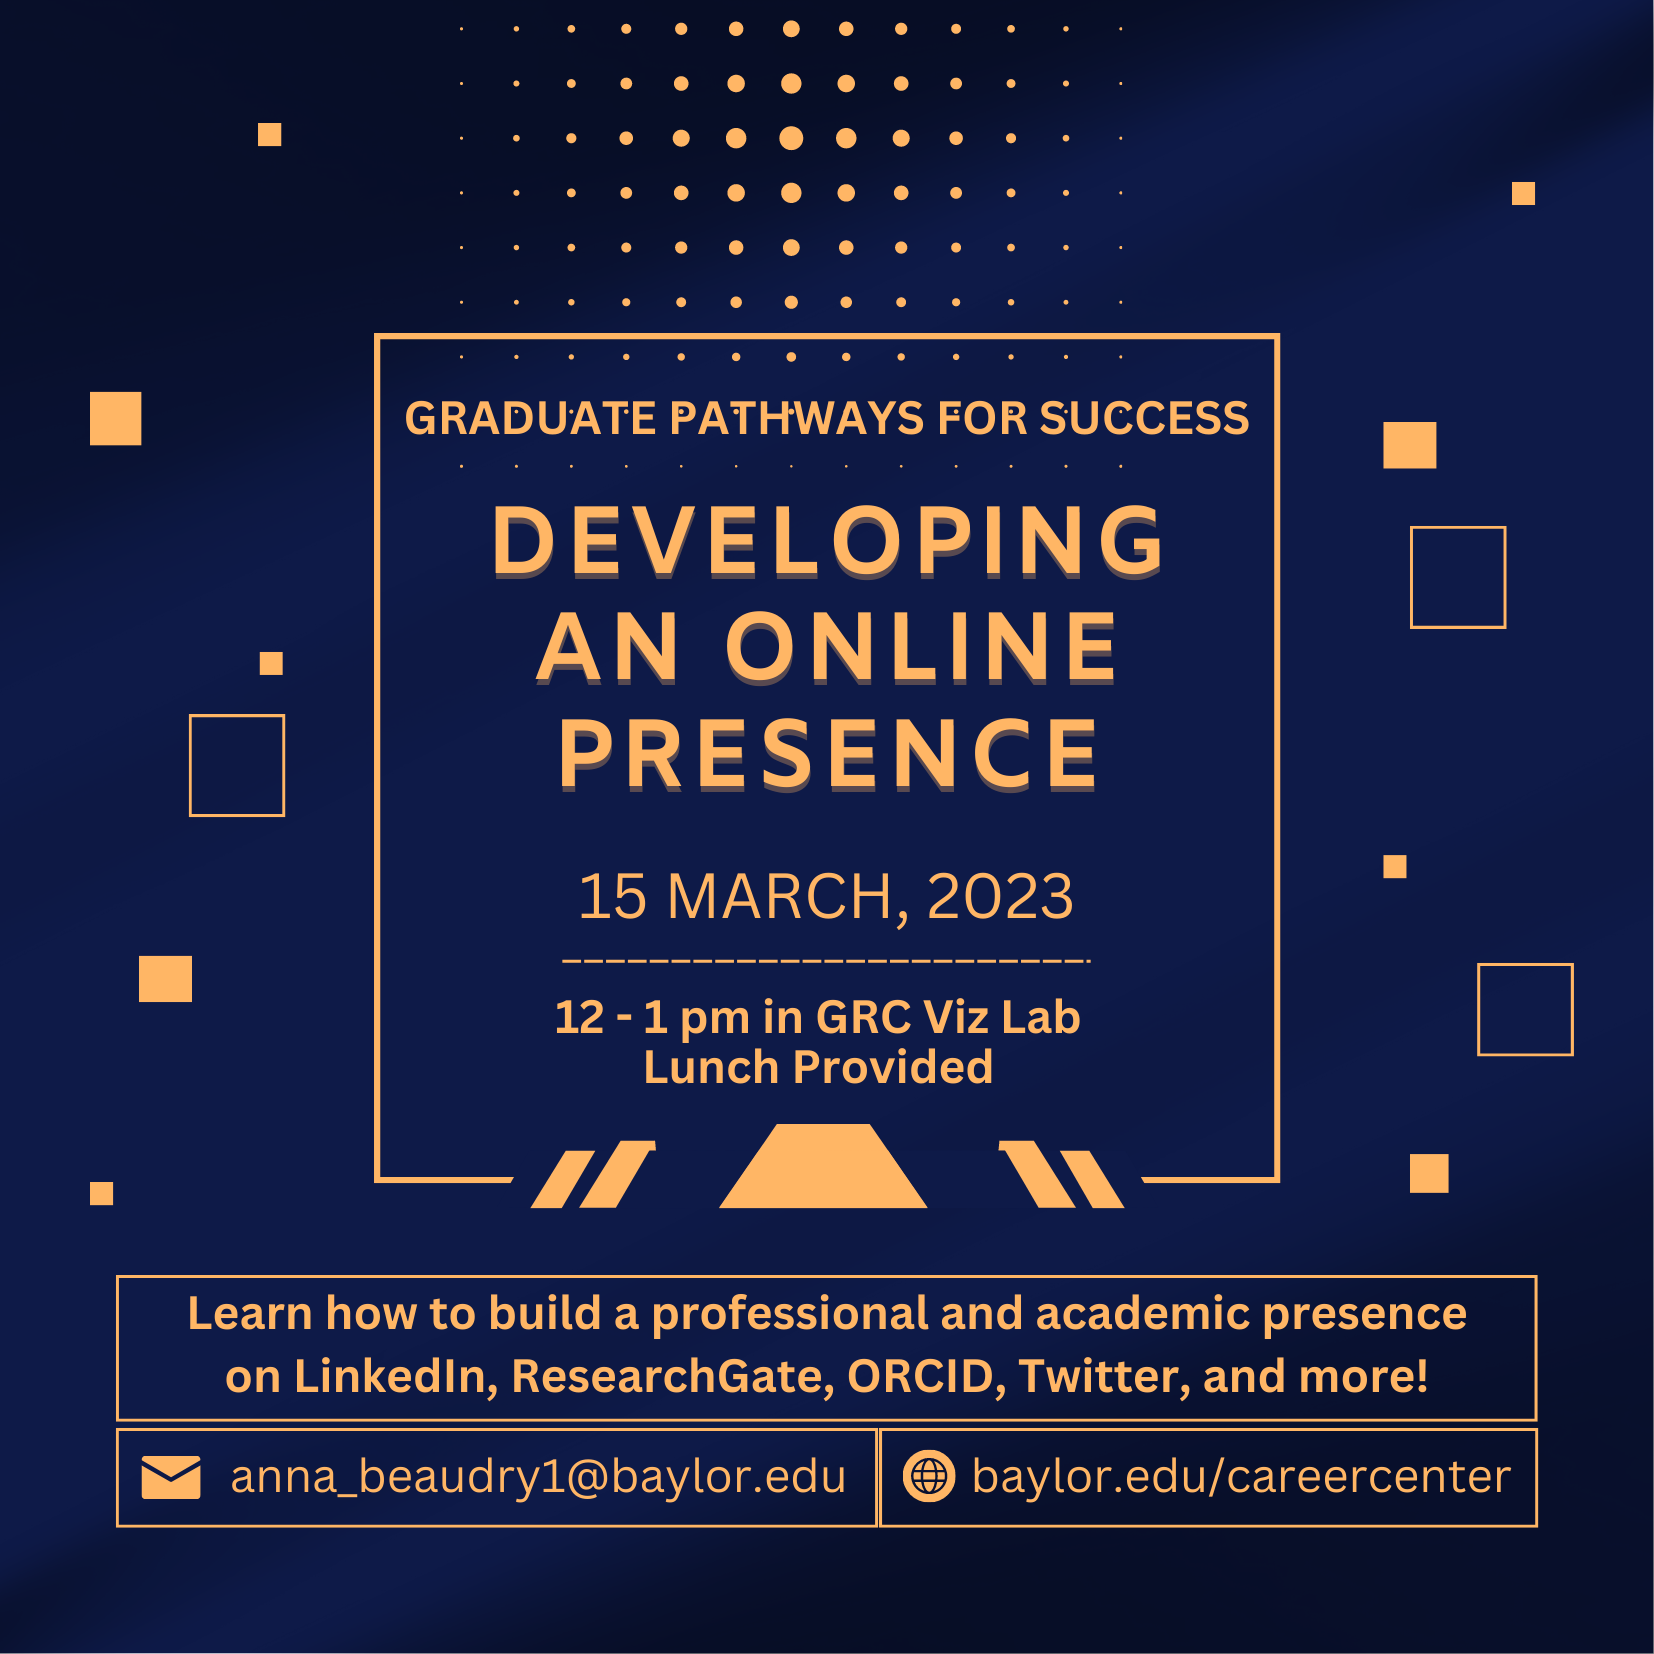 Graduate Pathways for Success. Developing an online presence. March 15th, 2023. 12 - 1 pm in GRC Viz Lab. Lunch provided. Learn how to build a professional and academic presence on LinkedIn, ResearchGate, OrcID, Twitter, and more! Anna_beaudry1@baylor.edu, baylor.edu/careercenter.